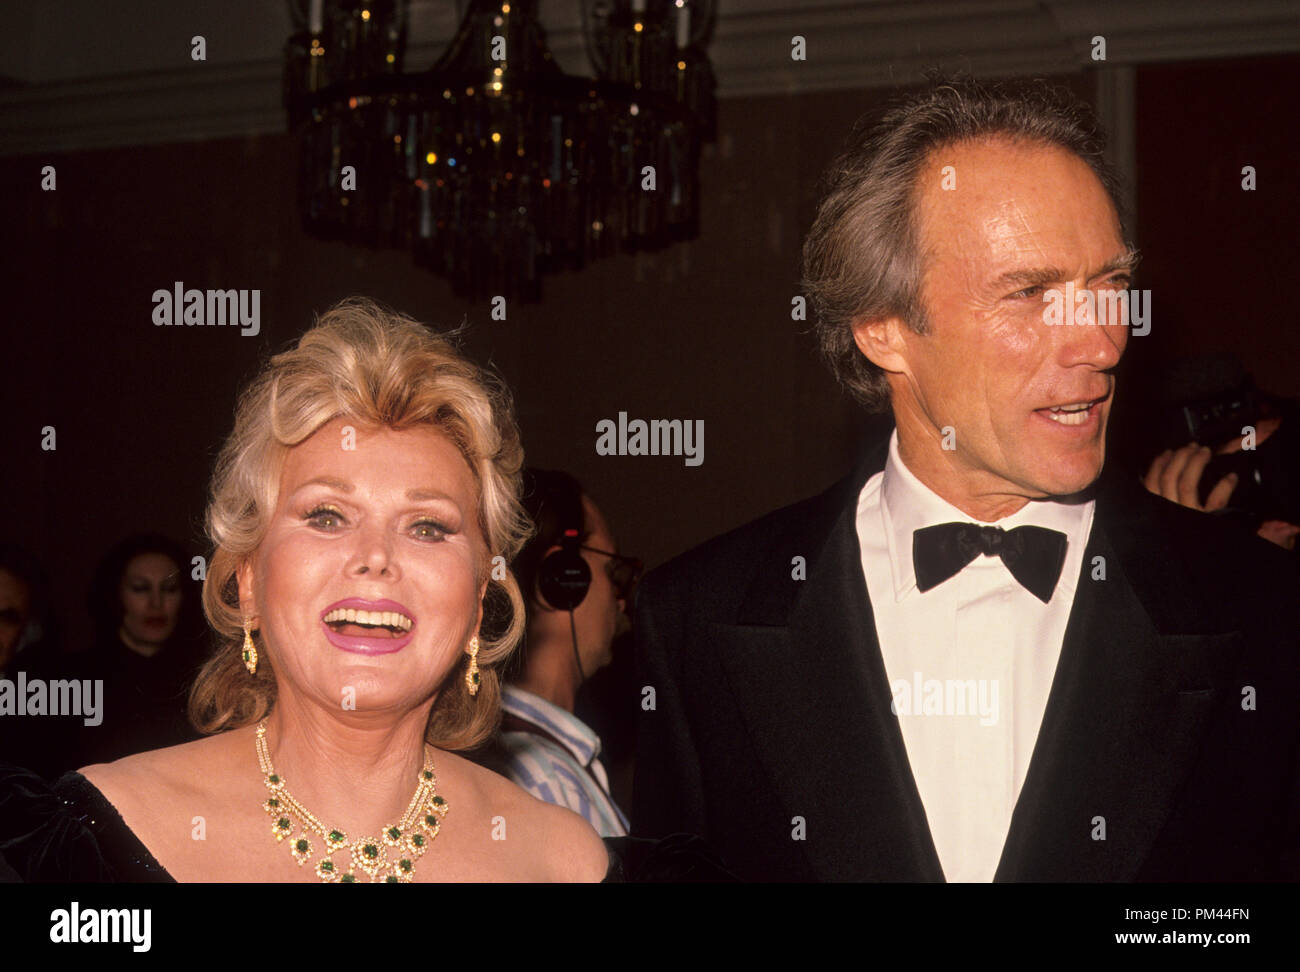 Clint Eastwood and Zsa Zsa Gabor, circa 1990. File Reference #1022 017THA © JRC Hollywood - All Rights Reserved Stock Photo - Alamy